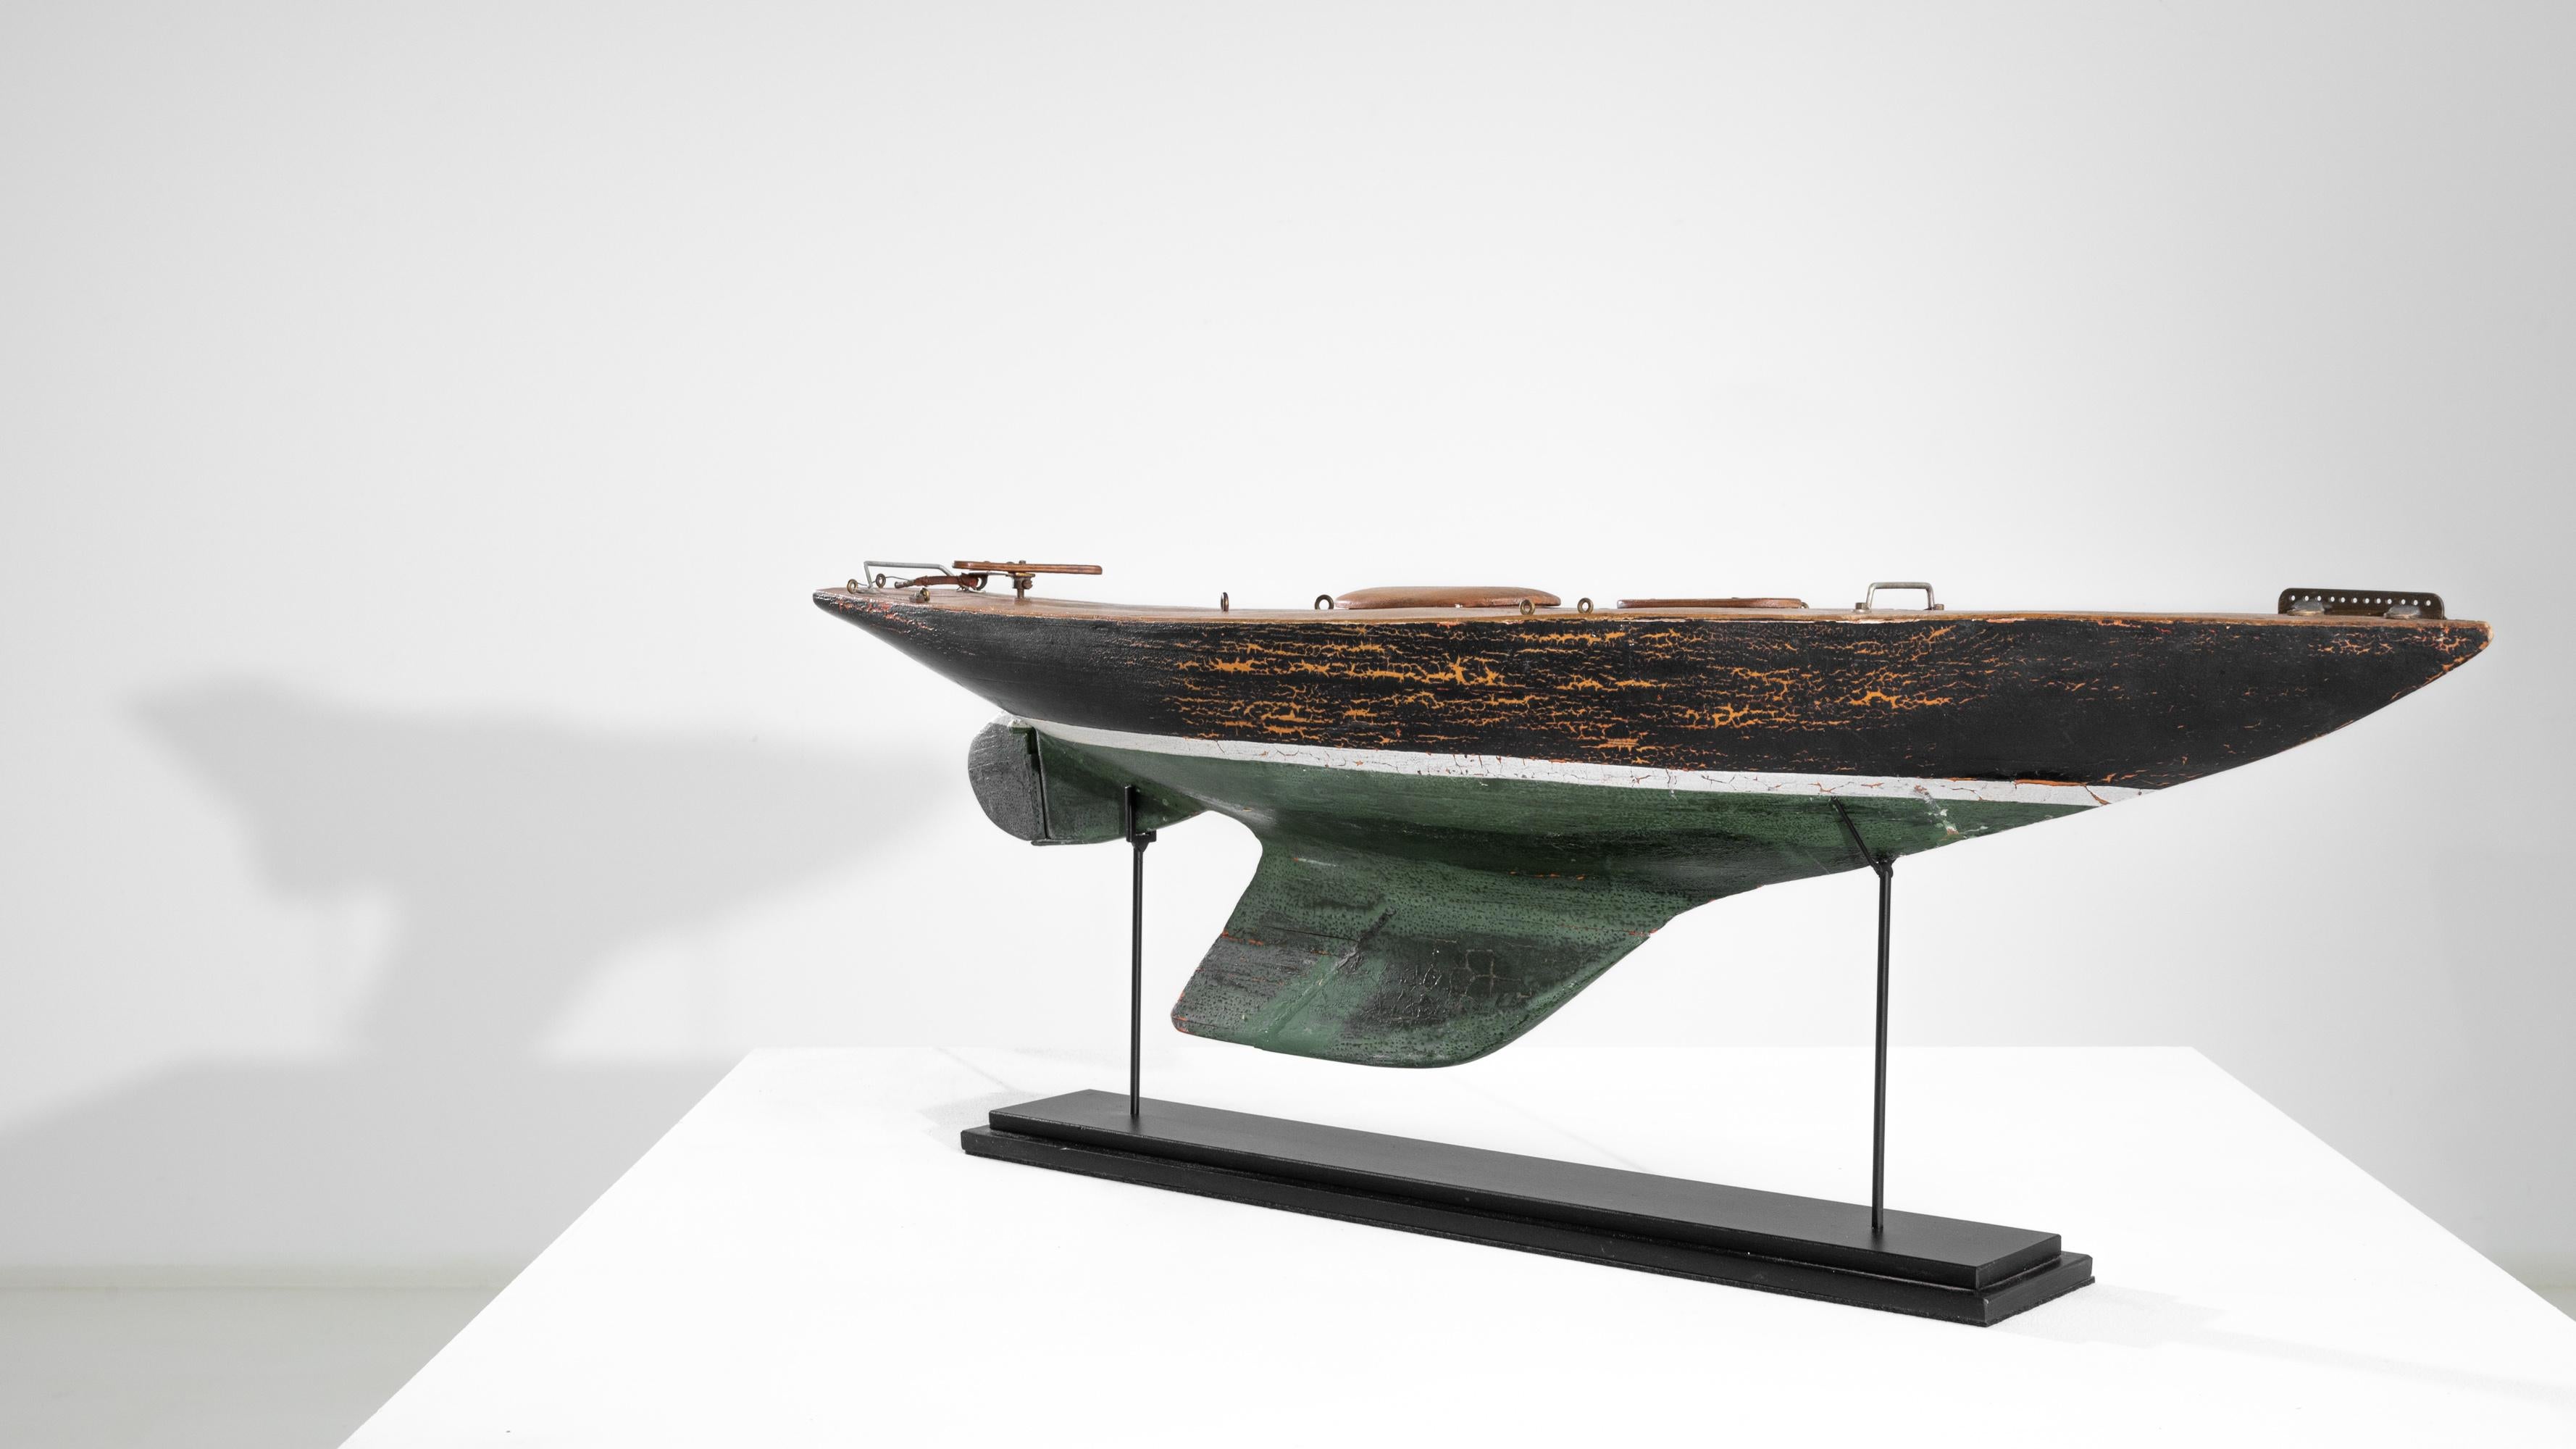 A beautiful miniature wooden boat produced in France, circa 1950. A model pond sailboat balanced on a metal stand, leans on two slender rods in an airy posture. The exterior exhibits a rich black and bottle green finish, segmented by a dainty white